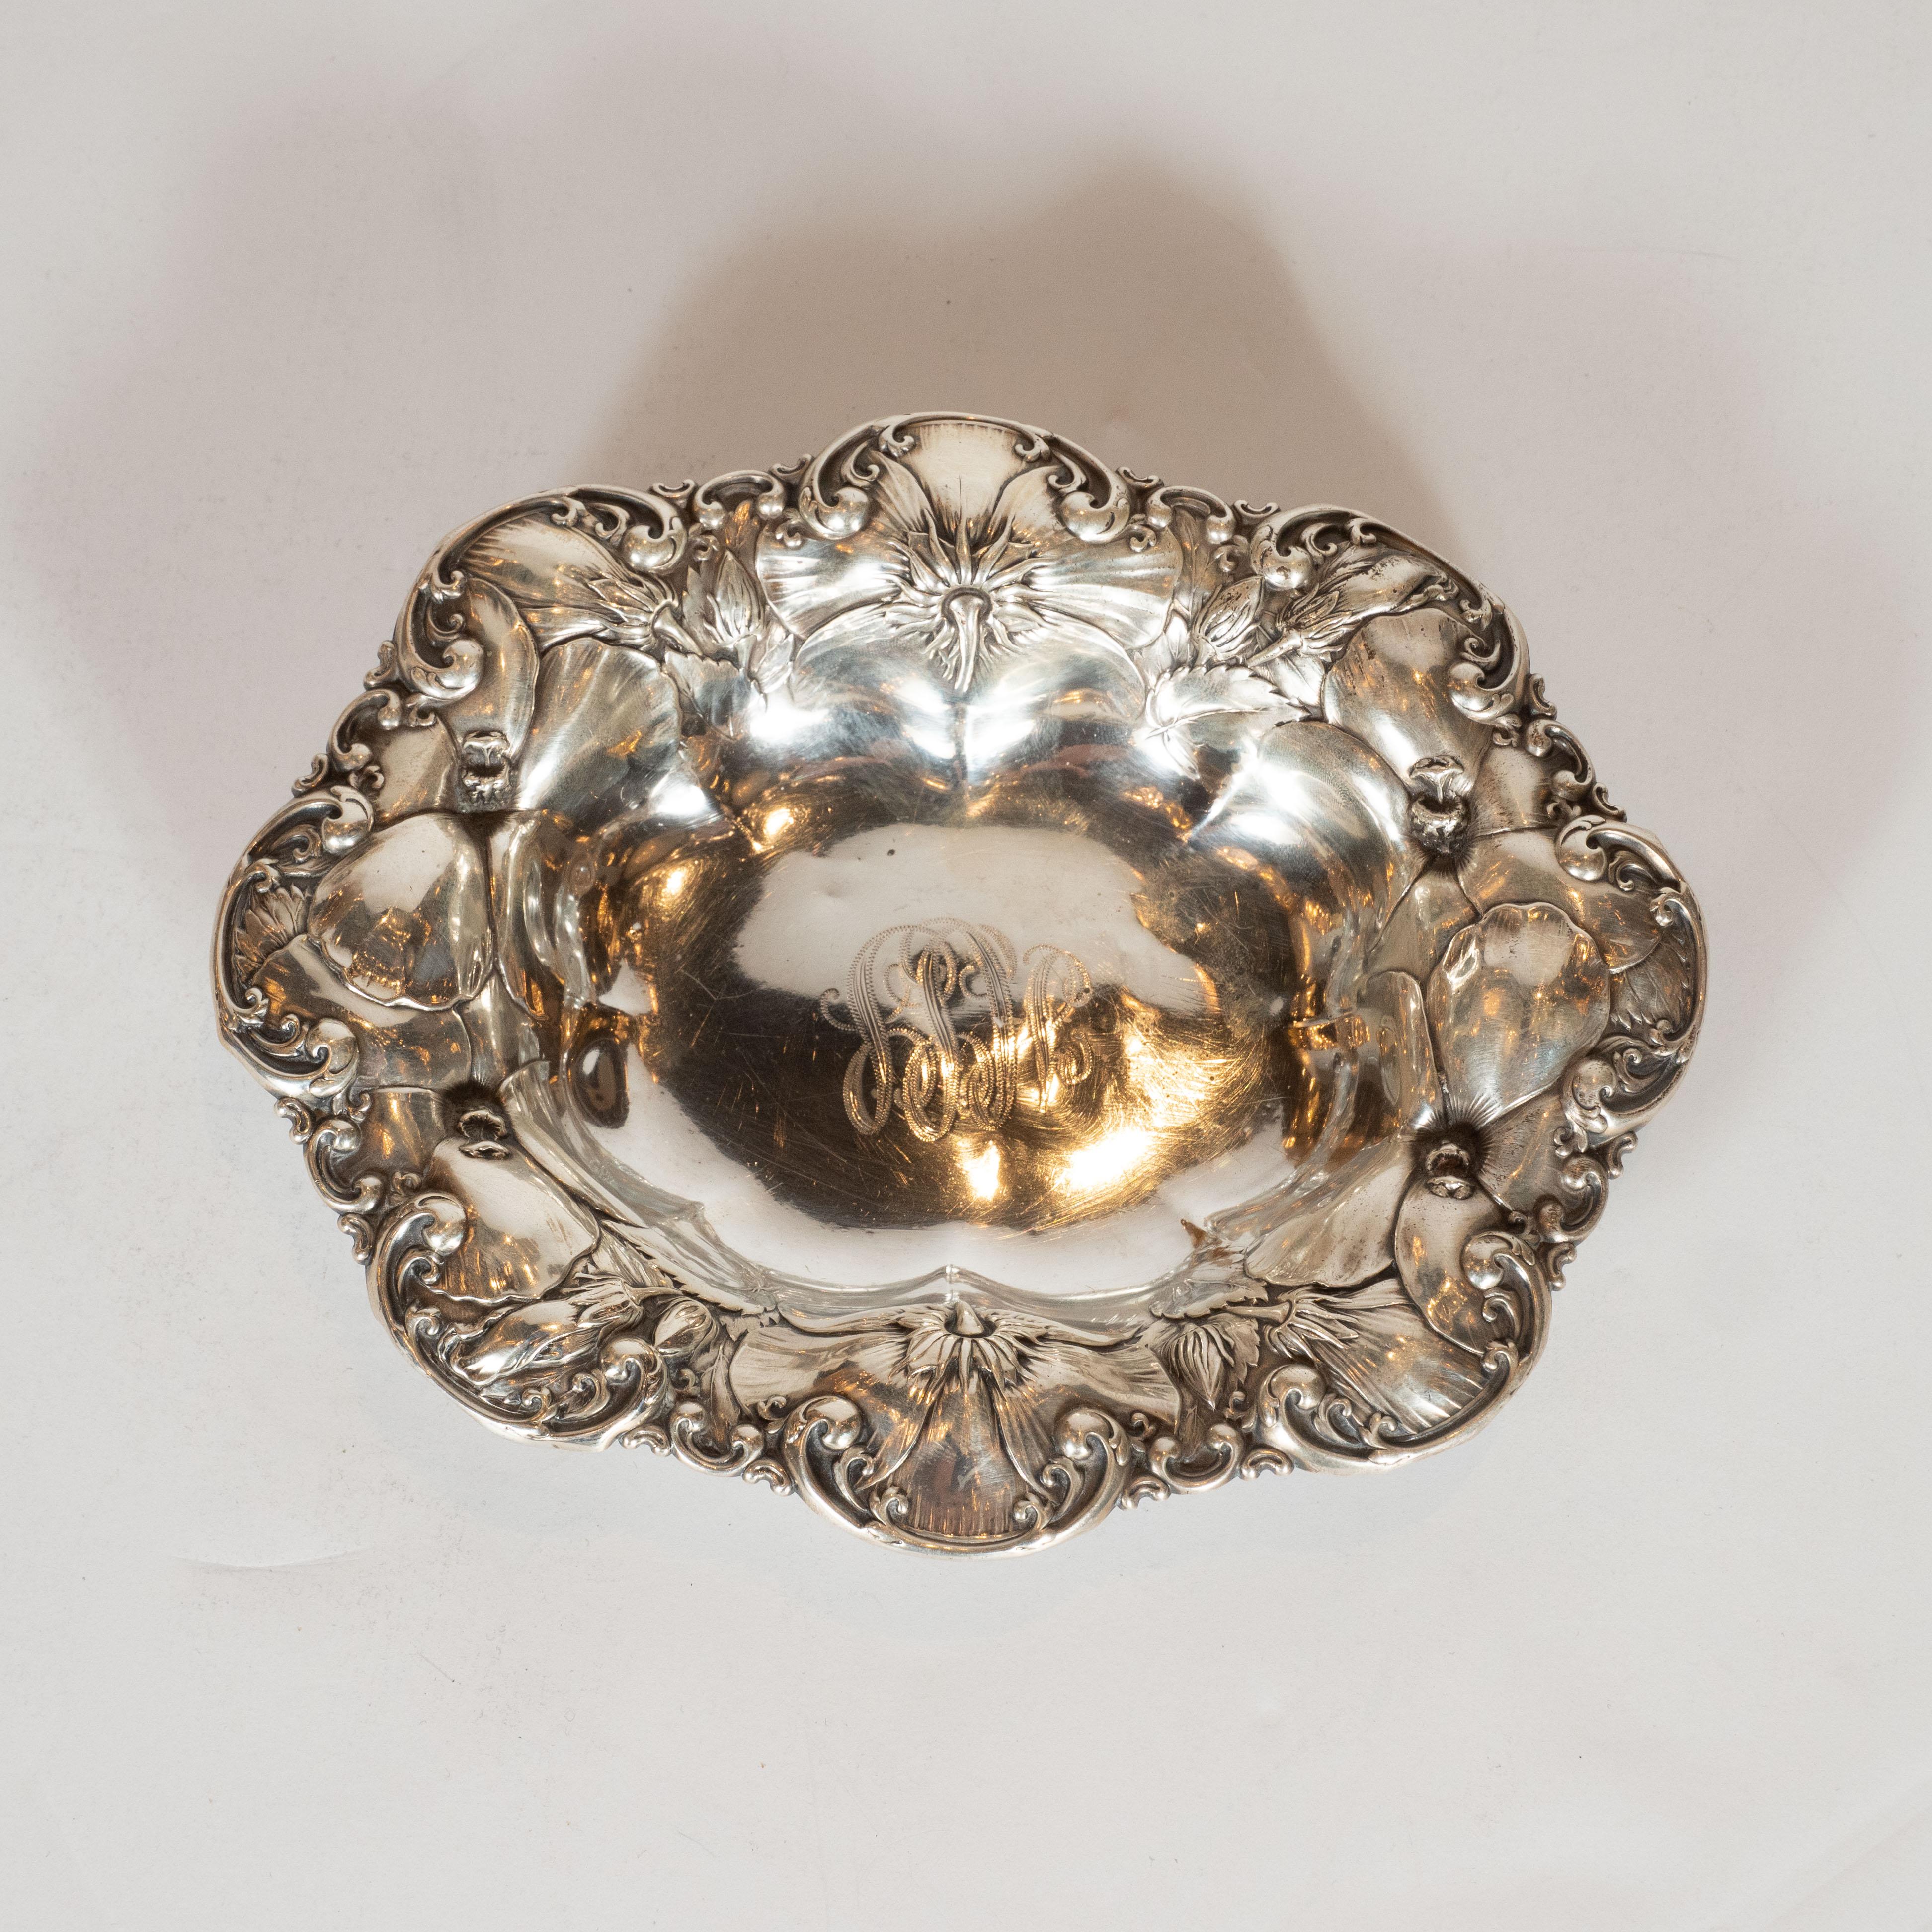 American Art Nouveau Sterling Silver Repousse Engraved Floral Decorative Dish In Excellent Condition For Sale In New York, NY